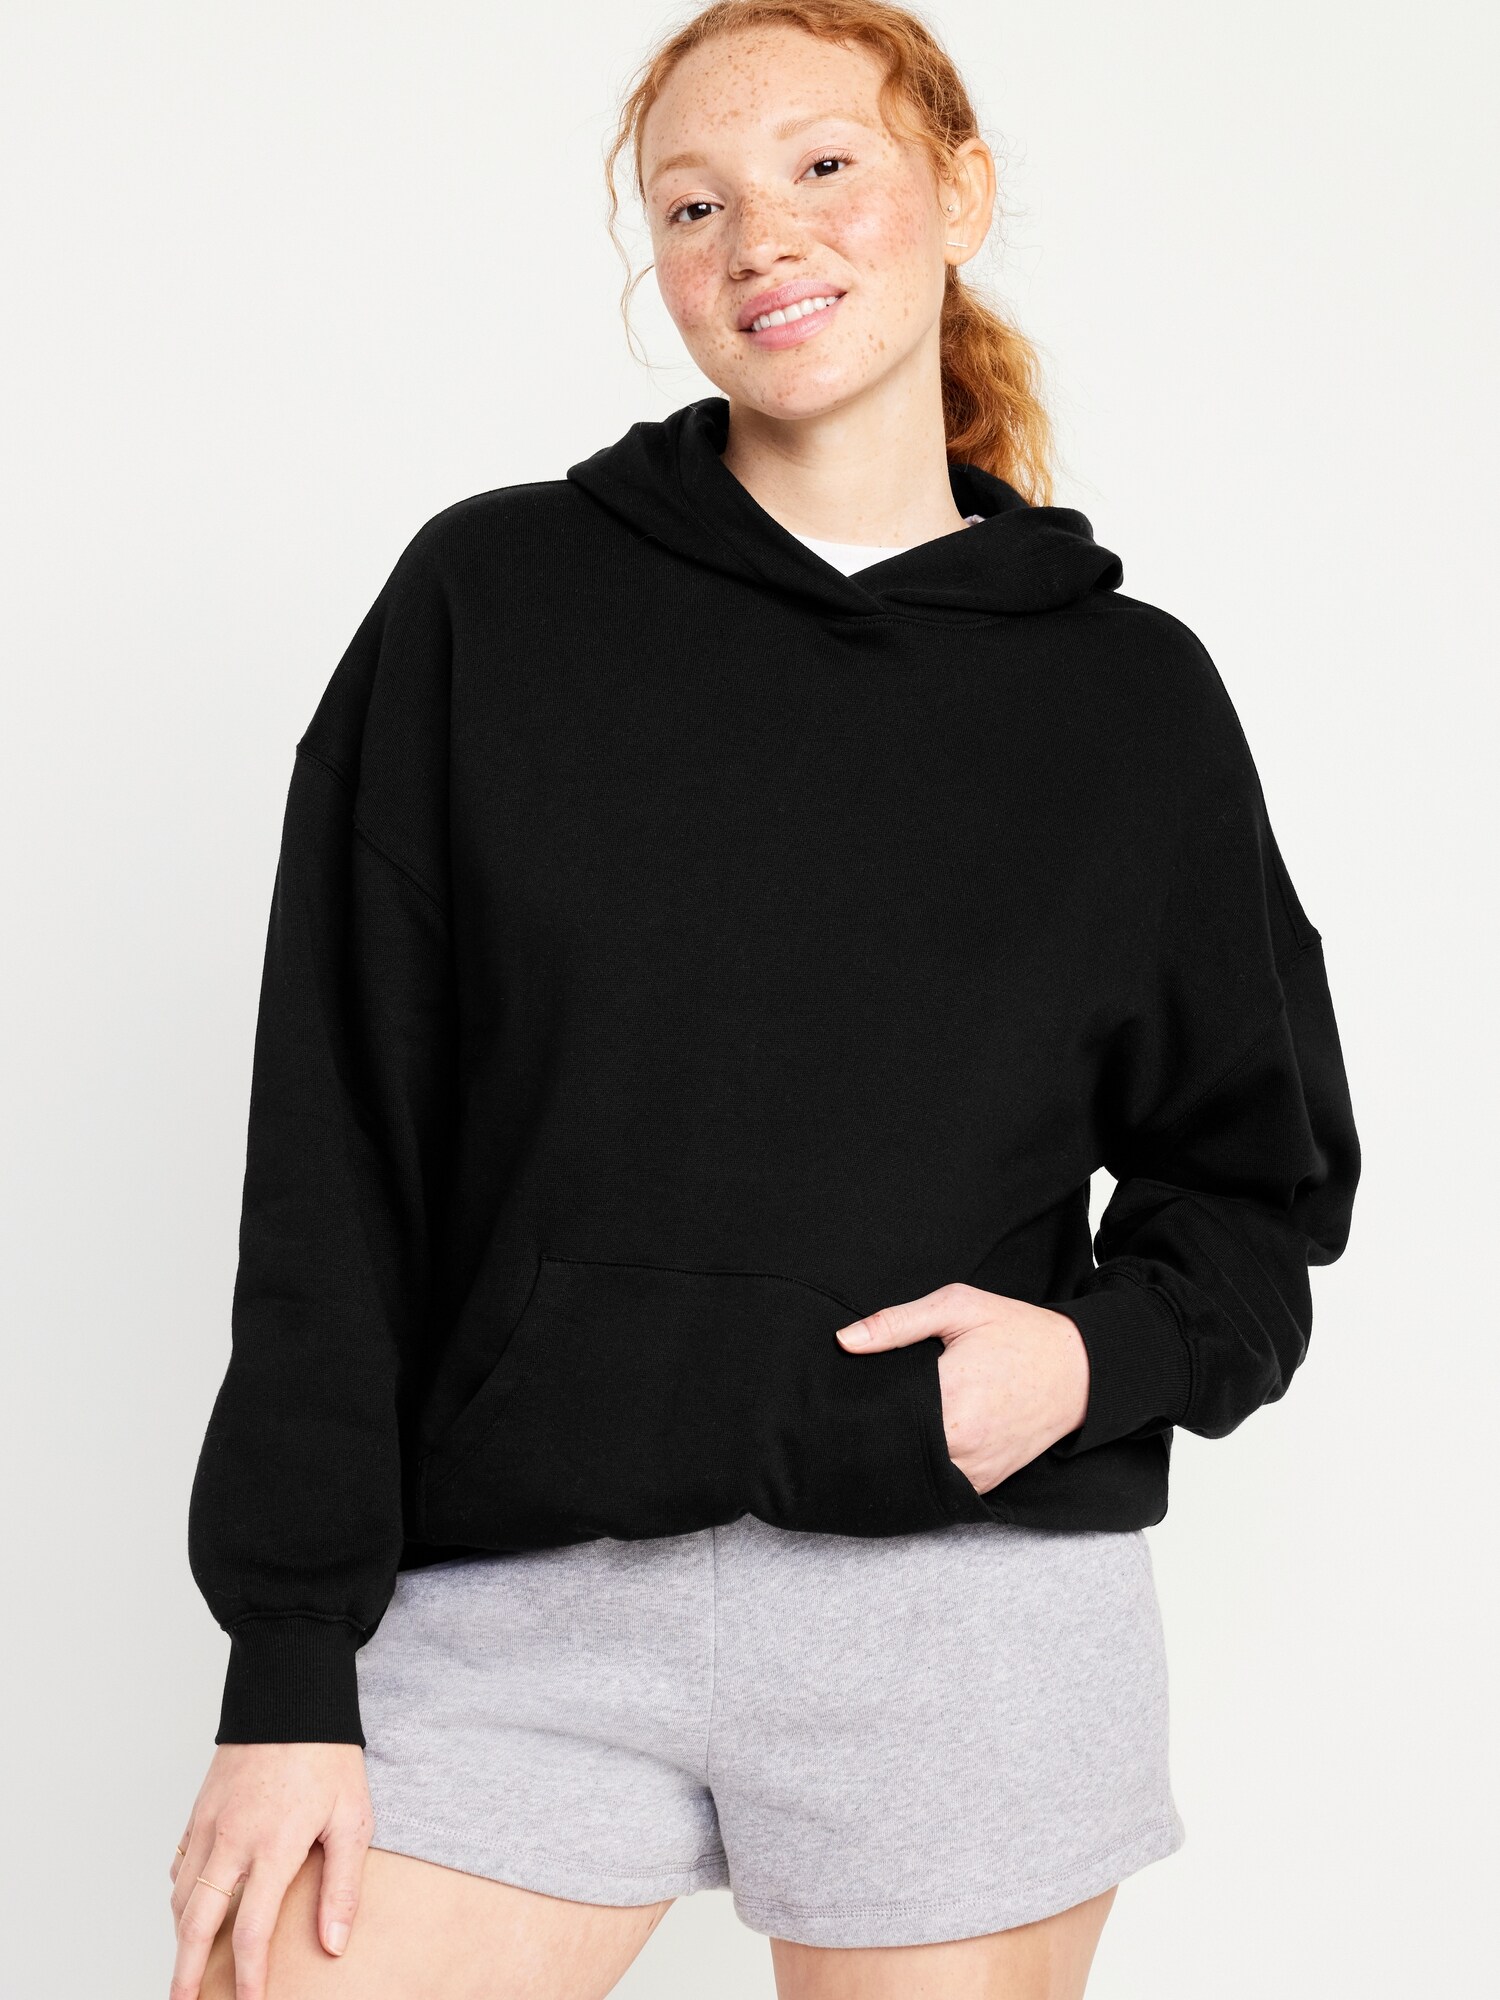 Oversized Pullover Hoodie for Women